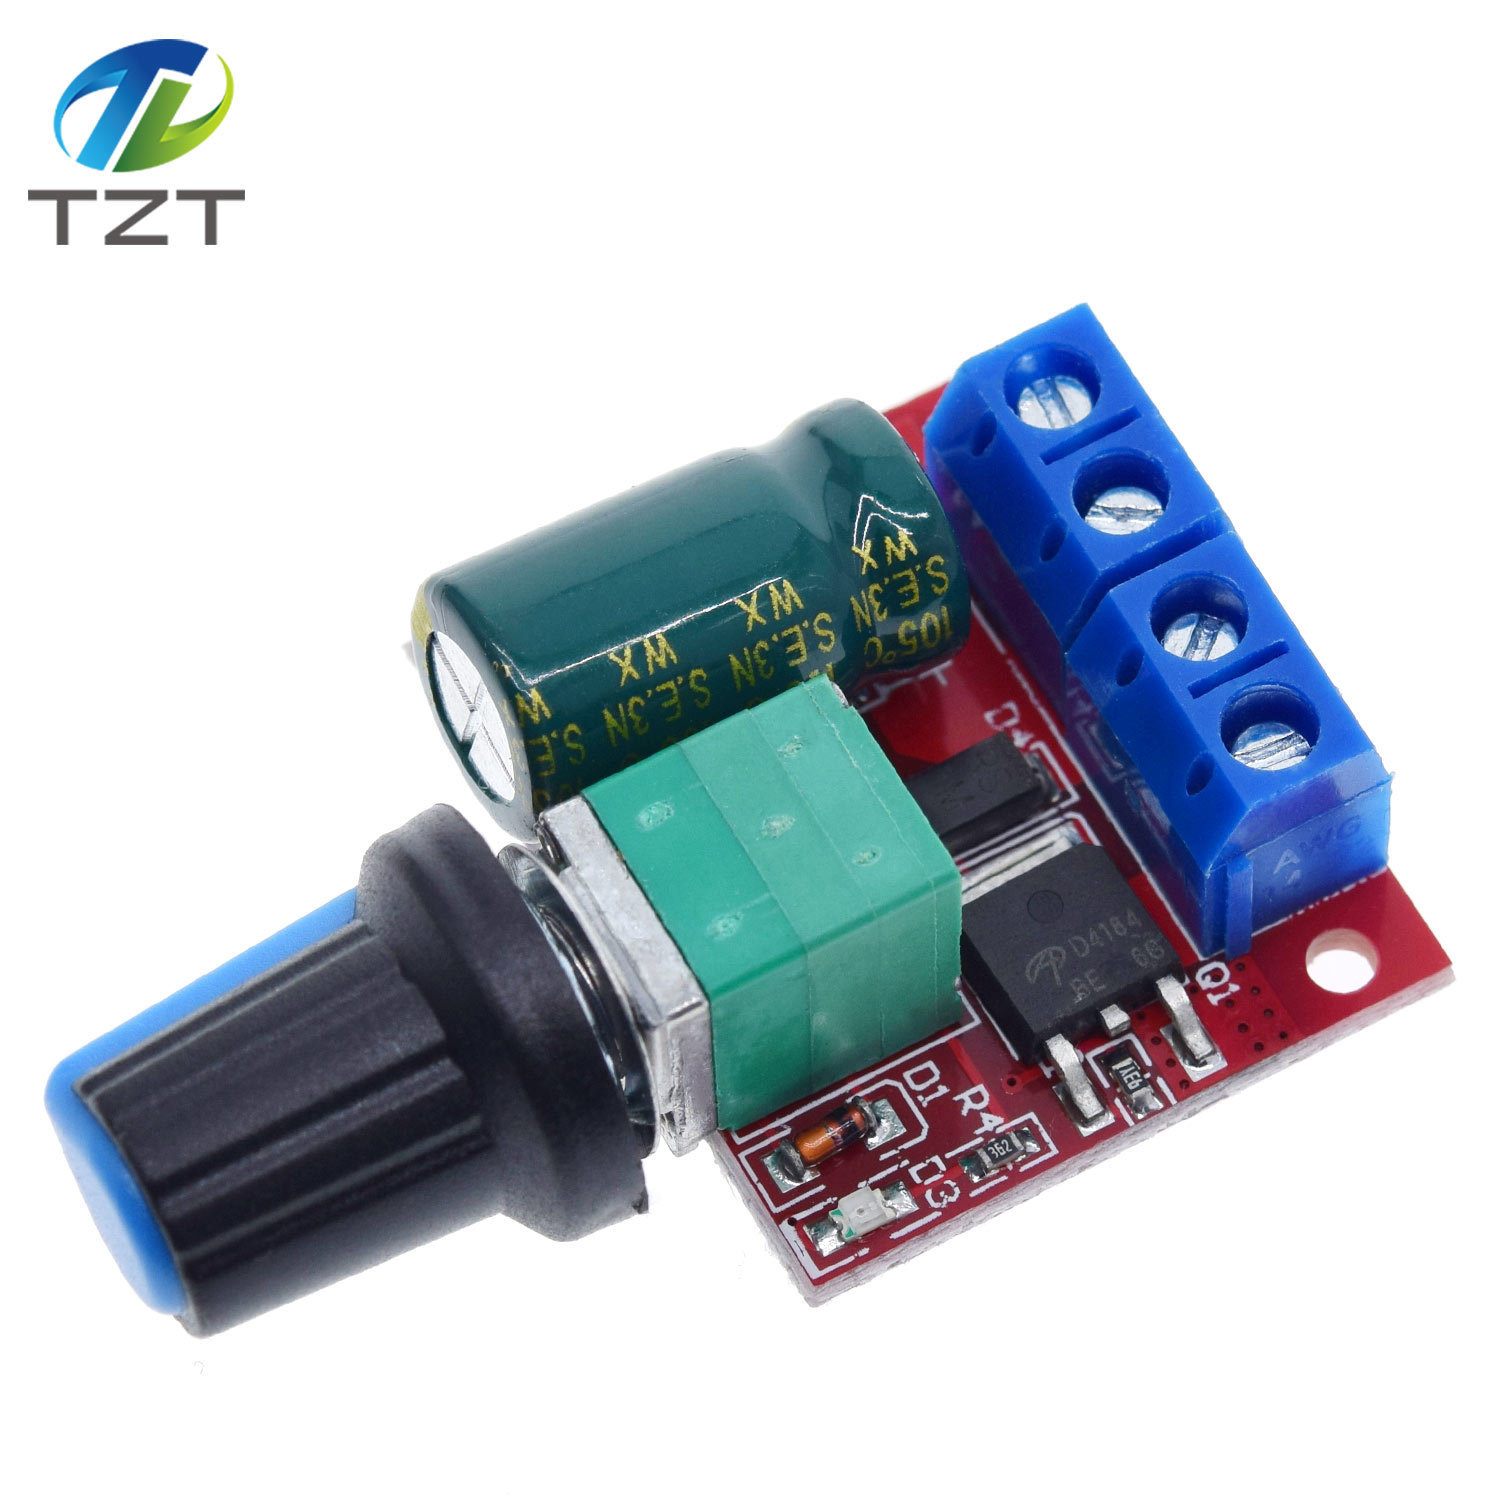 TZT DC 4.5V-35V 5A 20khz LED PWM DC Motor Controller Speed Control Dimming Max 90W Newest